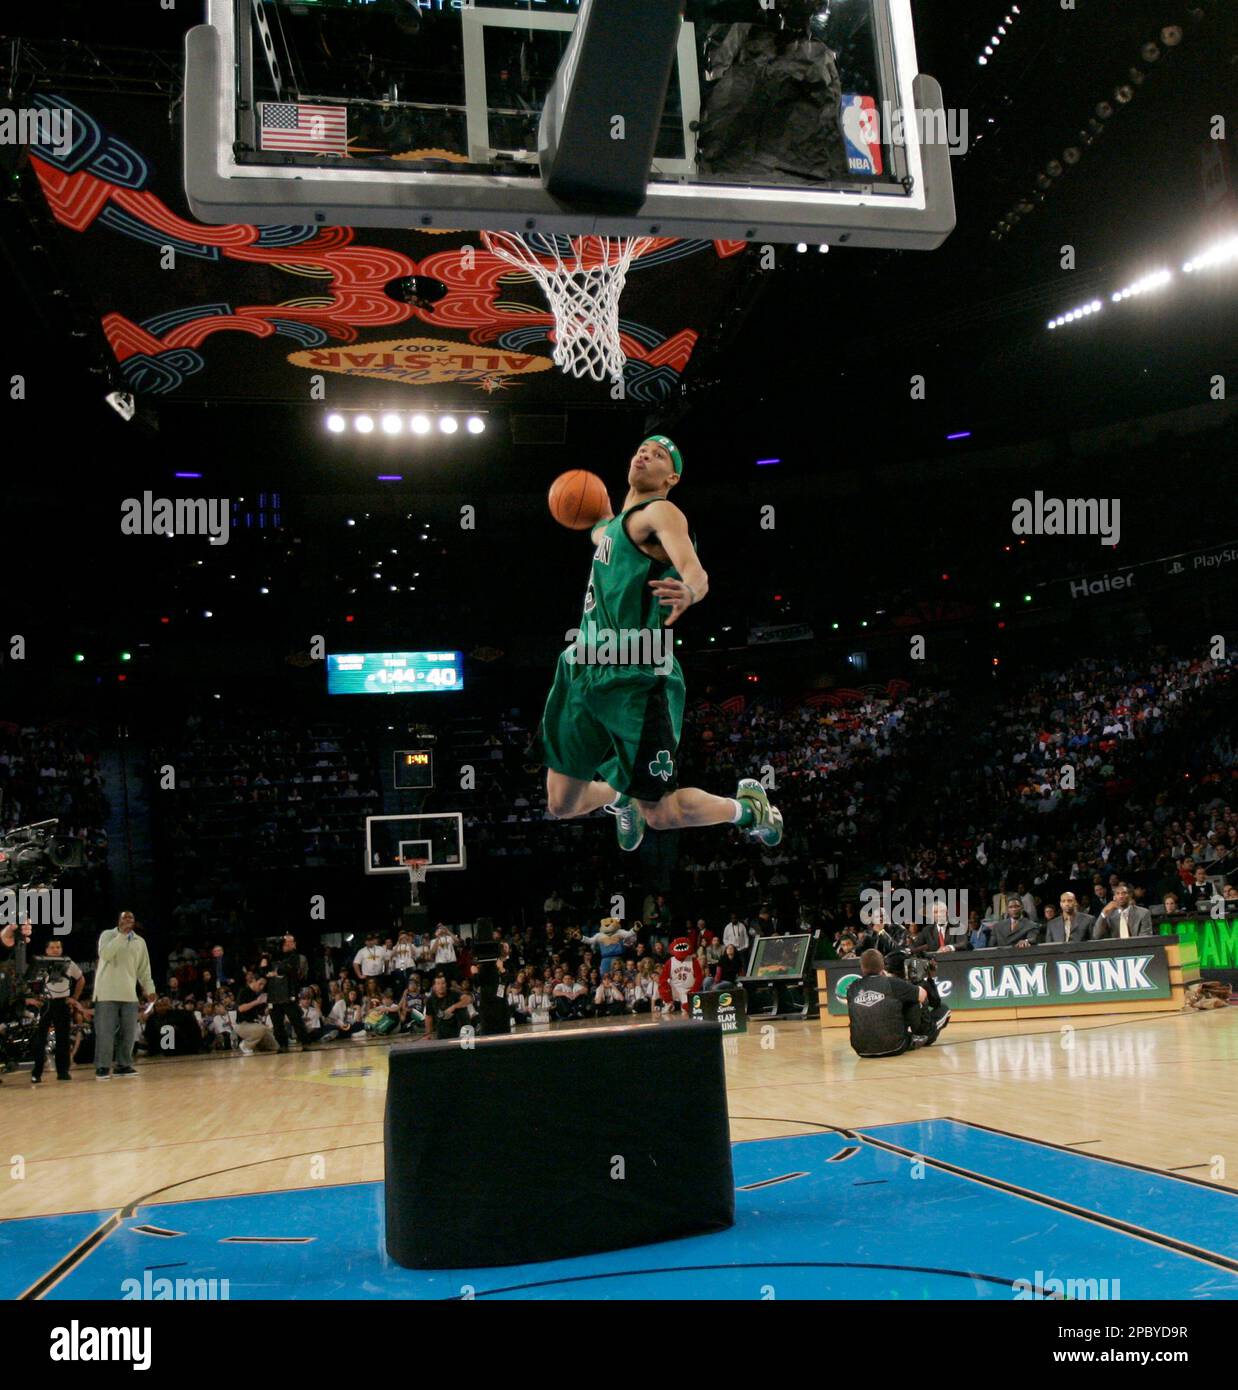 Gerald Green, from the Boston Celtics, jumps over a table to win the slam  dunk contest during NBA All-Star weekend in Las Vegas on Saturday, Feb. 17,  2007. (AP Photo/ Kevork Djansezian